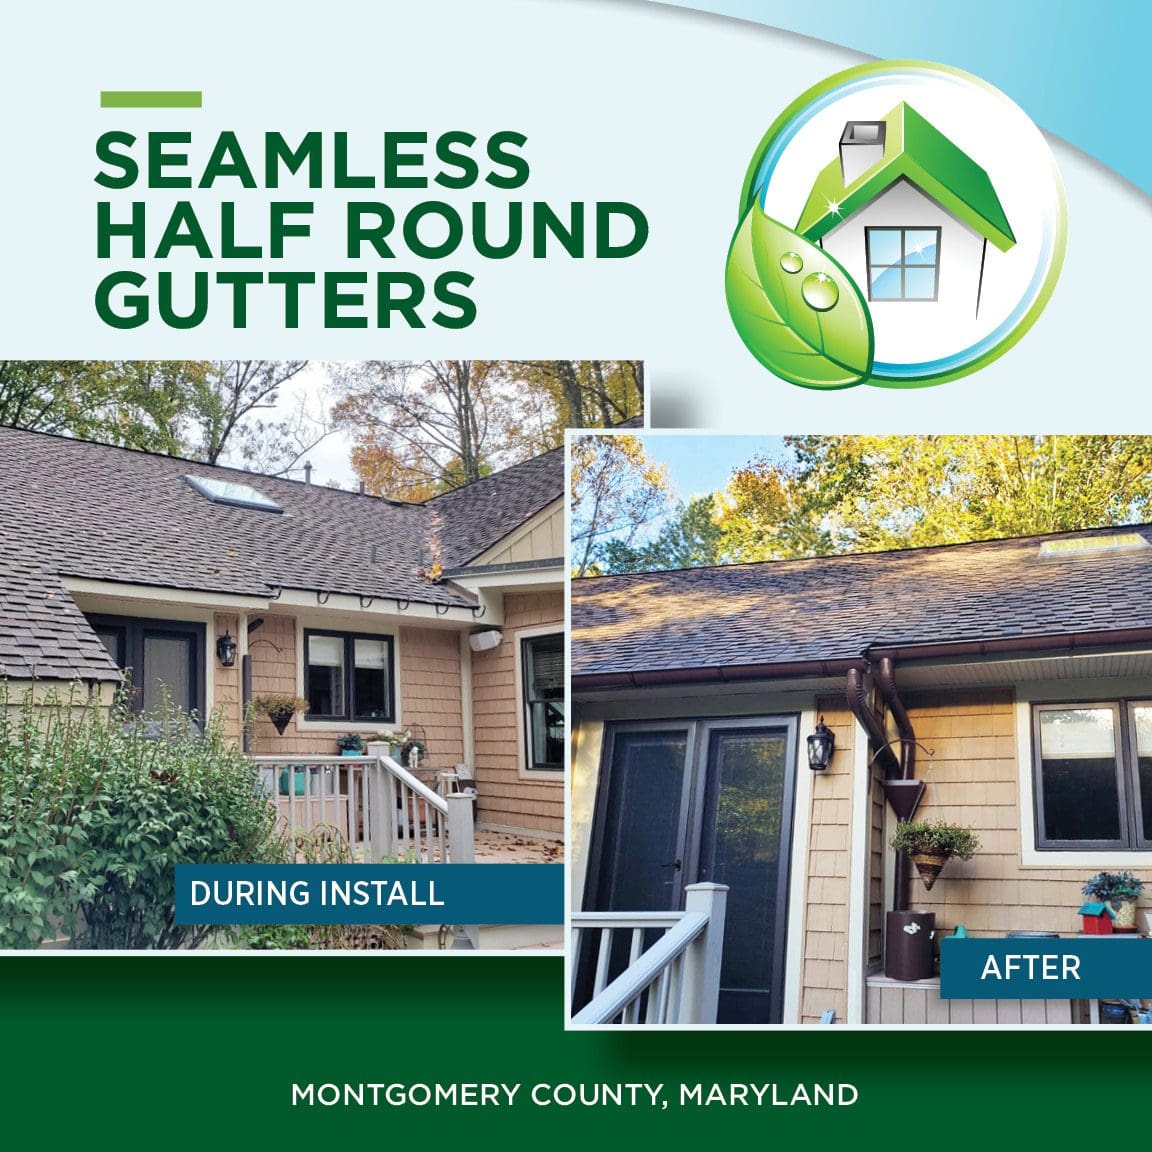 Seamless hald round gutters in Montgomery county Maryland